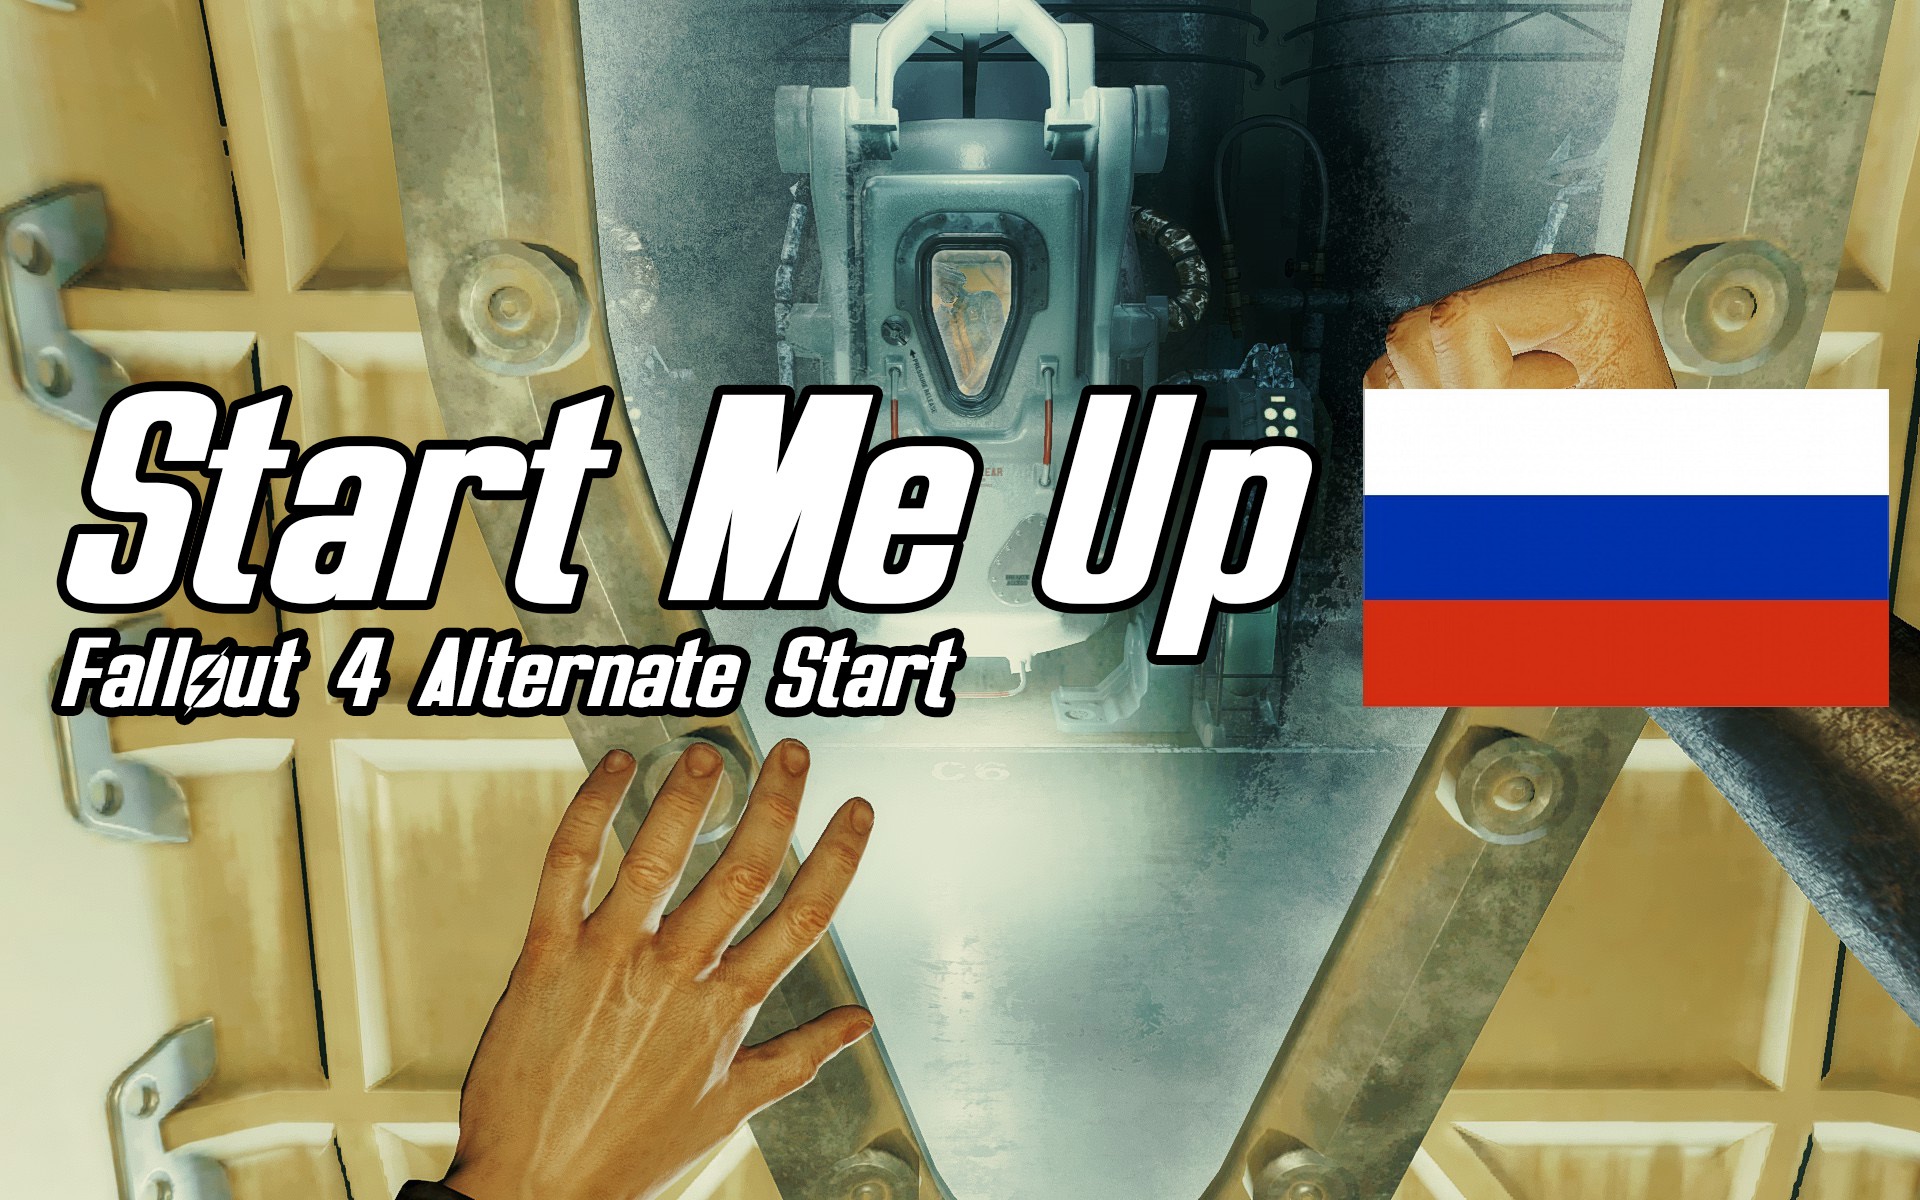 Fallout 4 мод бои на арене. Русификатор fallout epic games